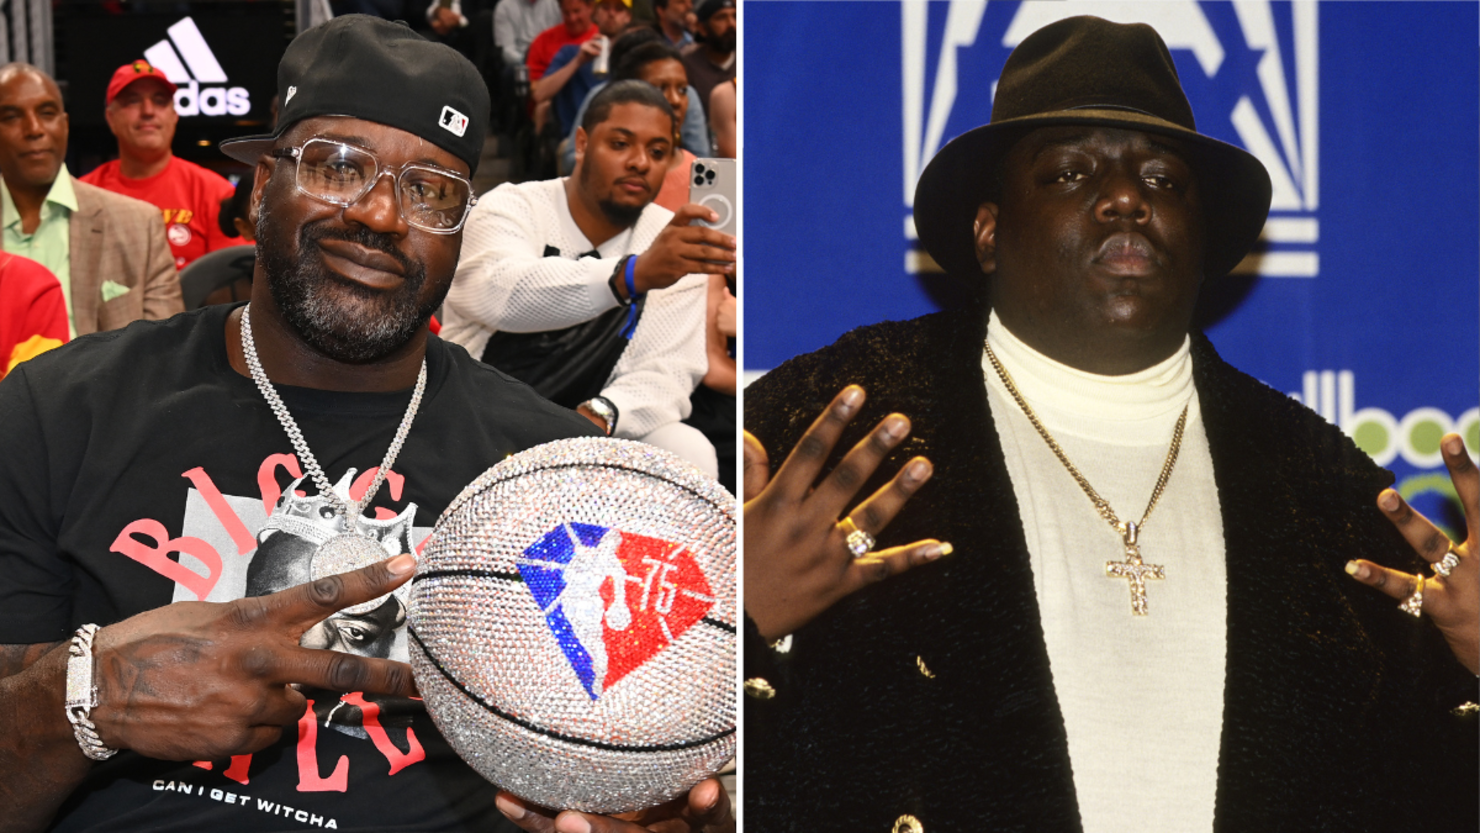 Shaquille O'Neal & The Notorious B.I.G.